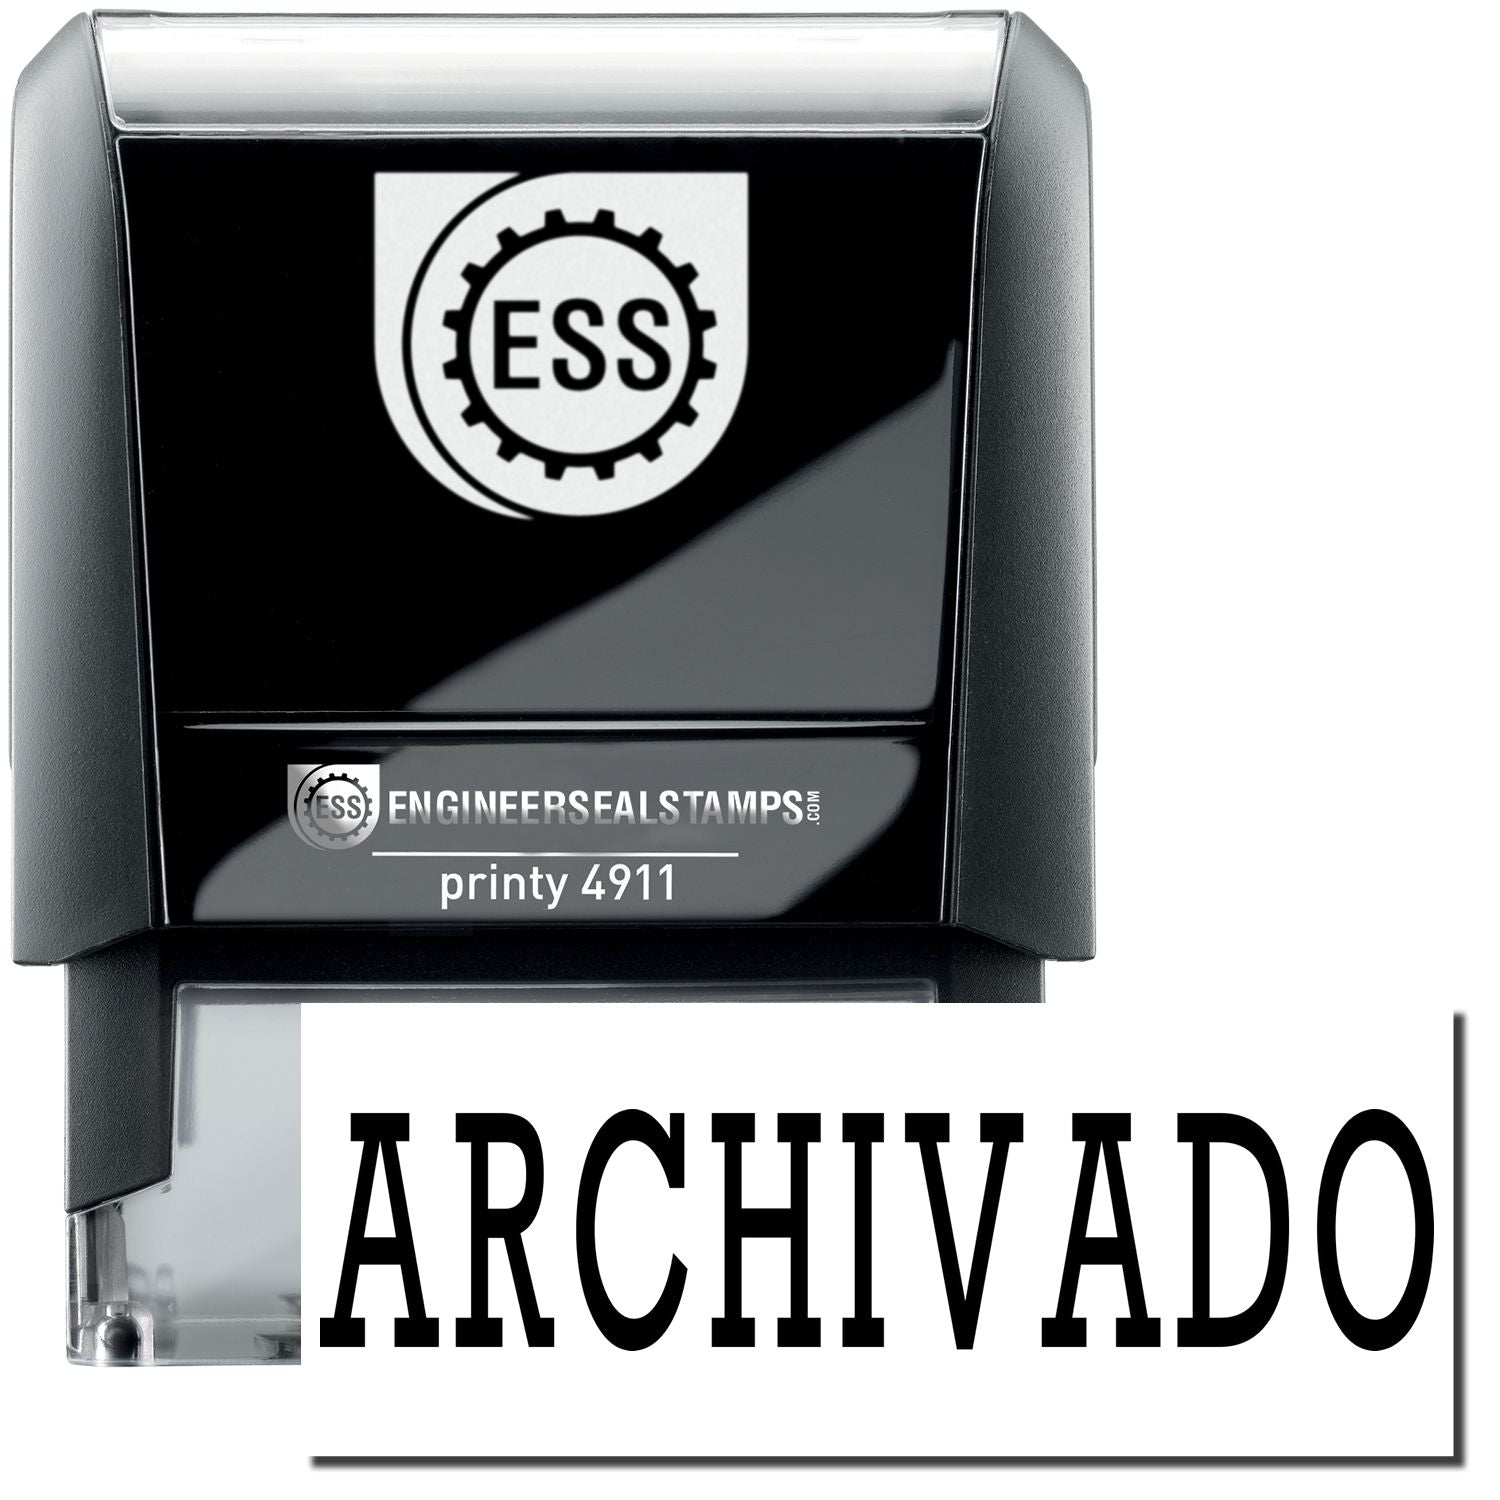 A self-inking stamp with a stamped image showing how the text "ARCHIVADO" is displayed after stamping.